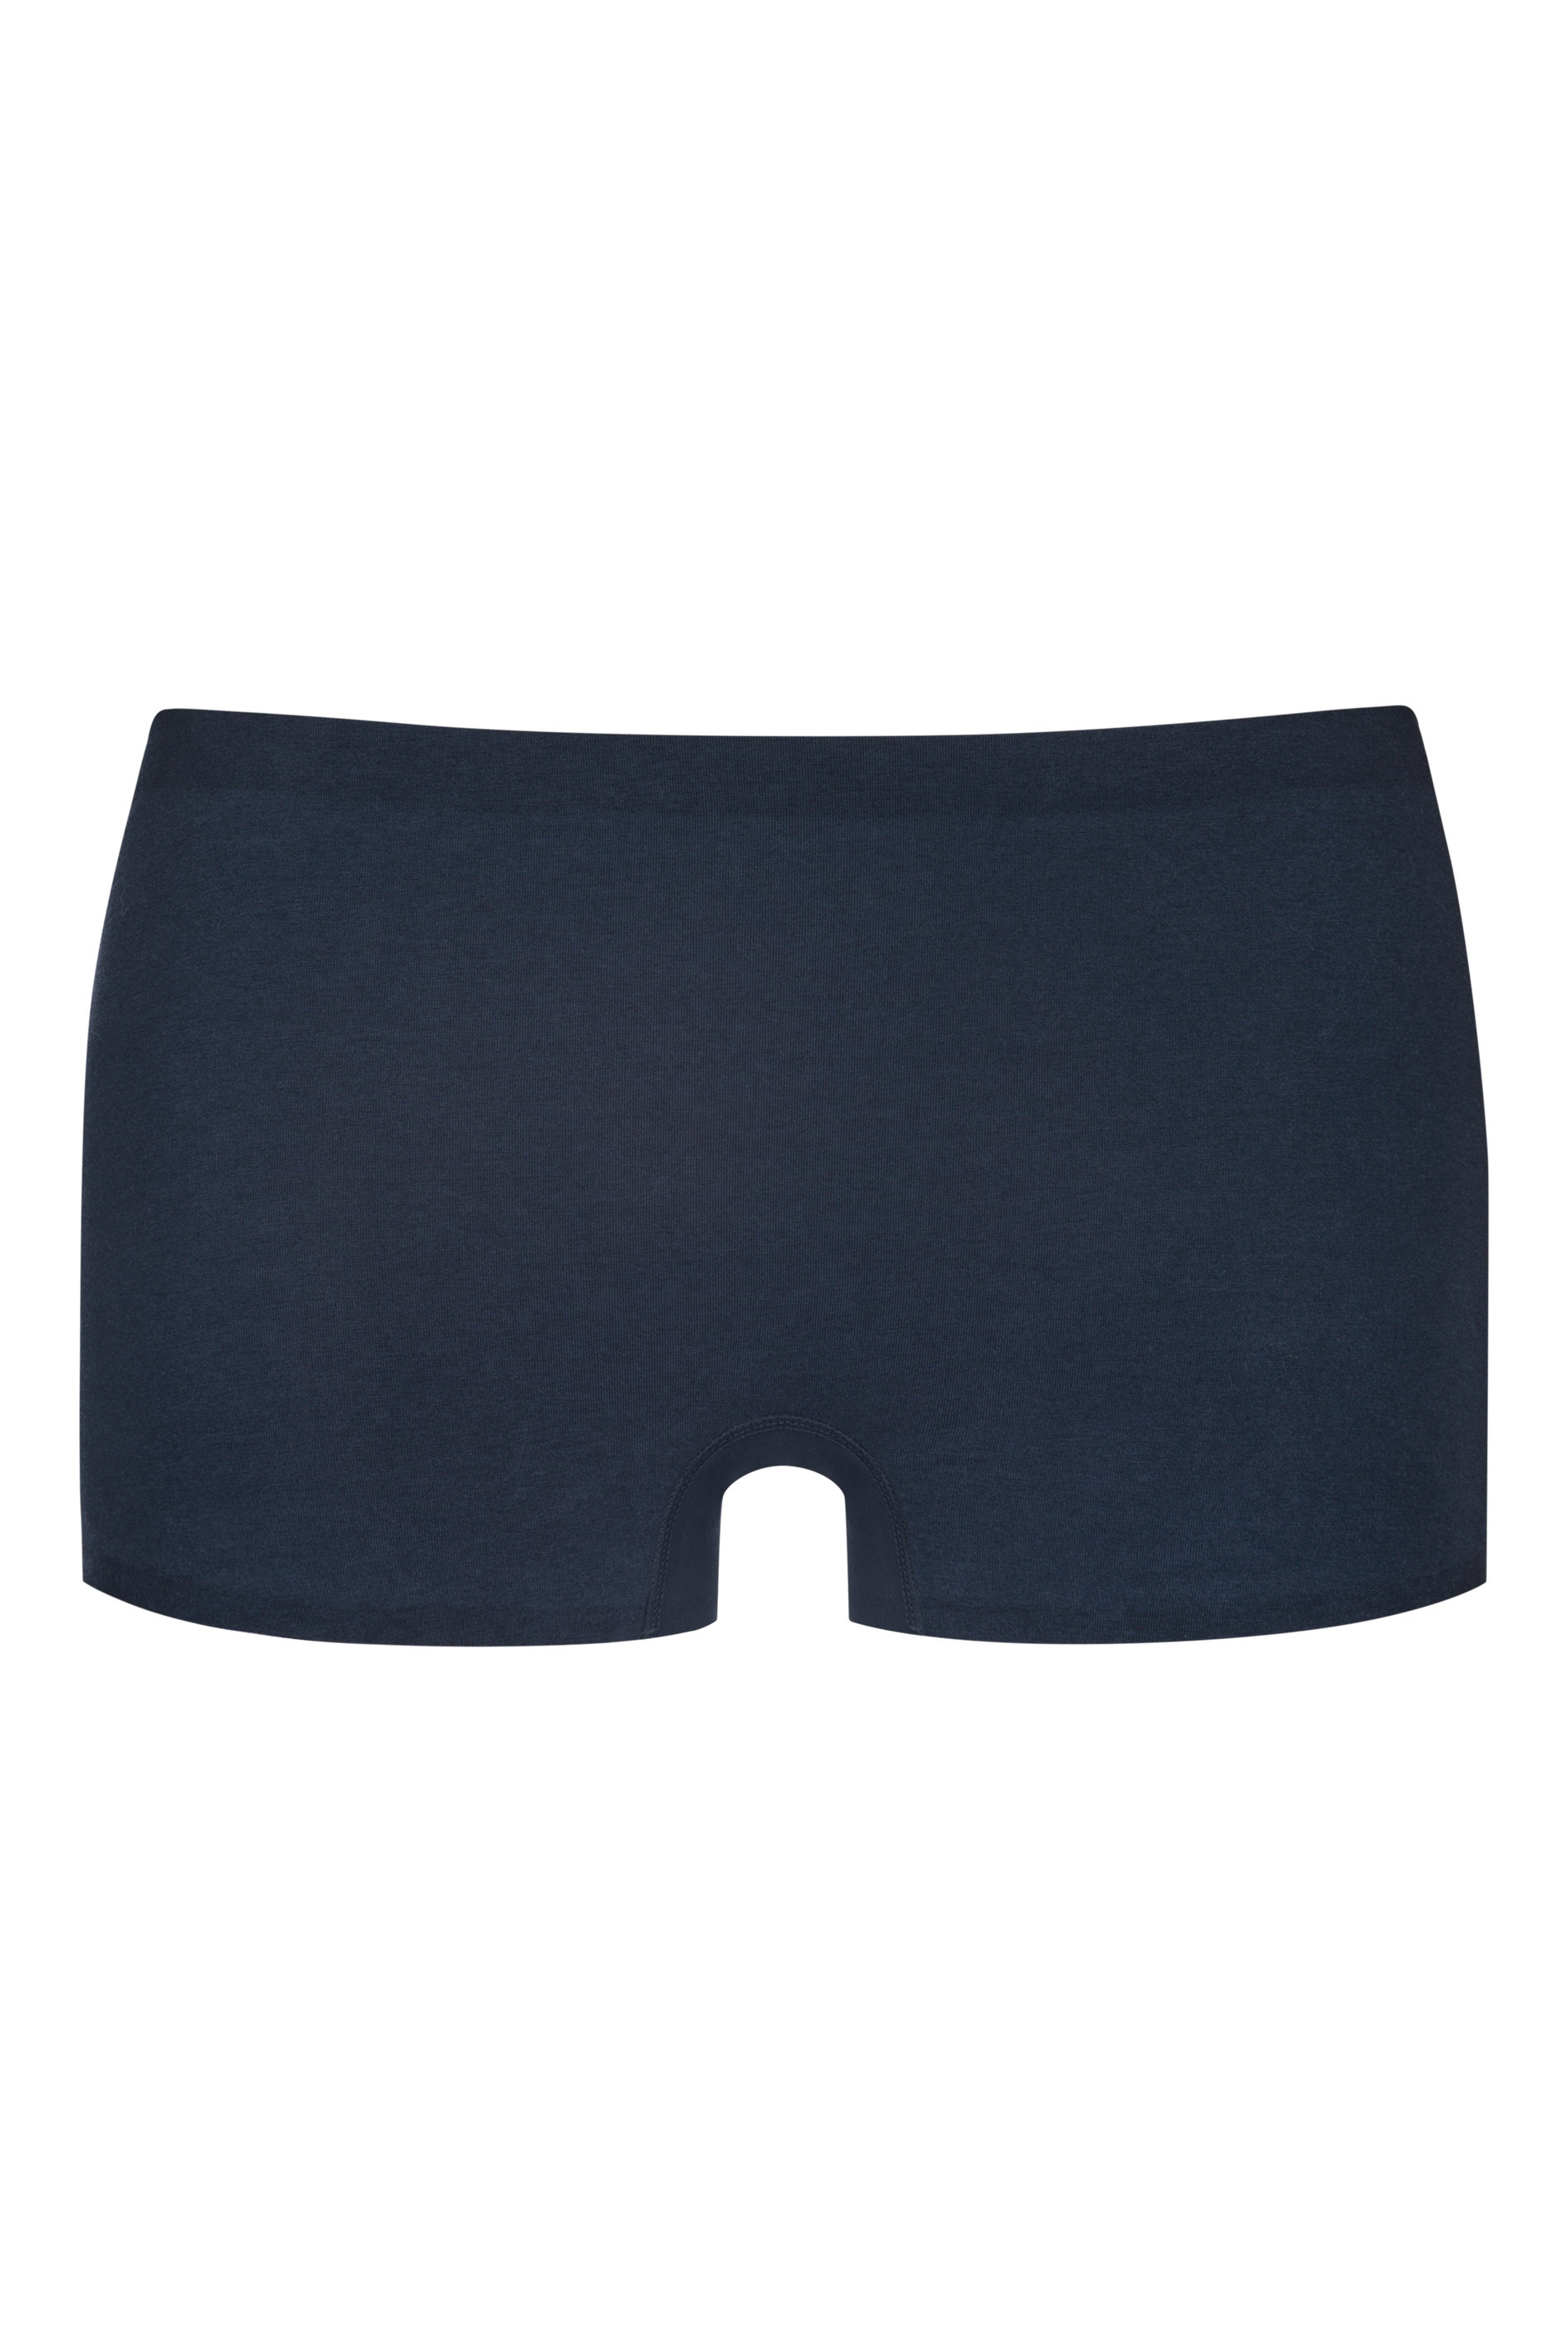 Shorts Night Blue Serie Natural Second me Uitknippen | mey®